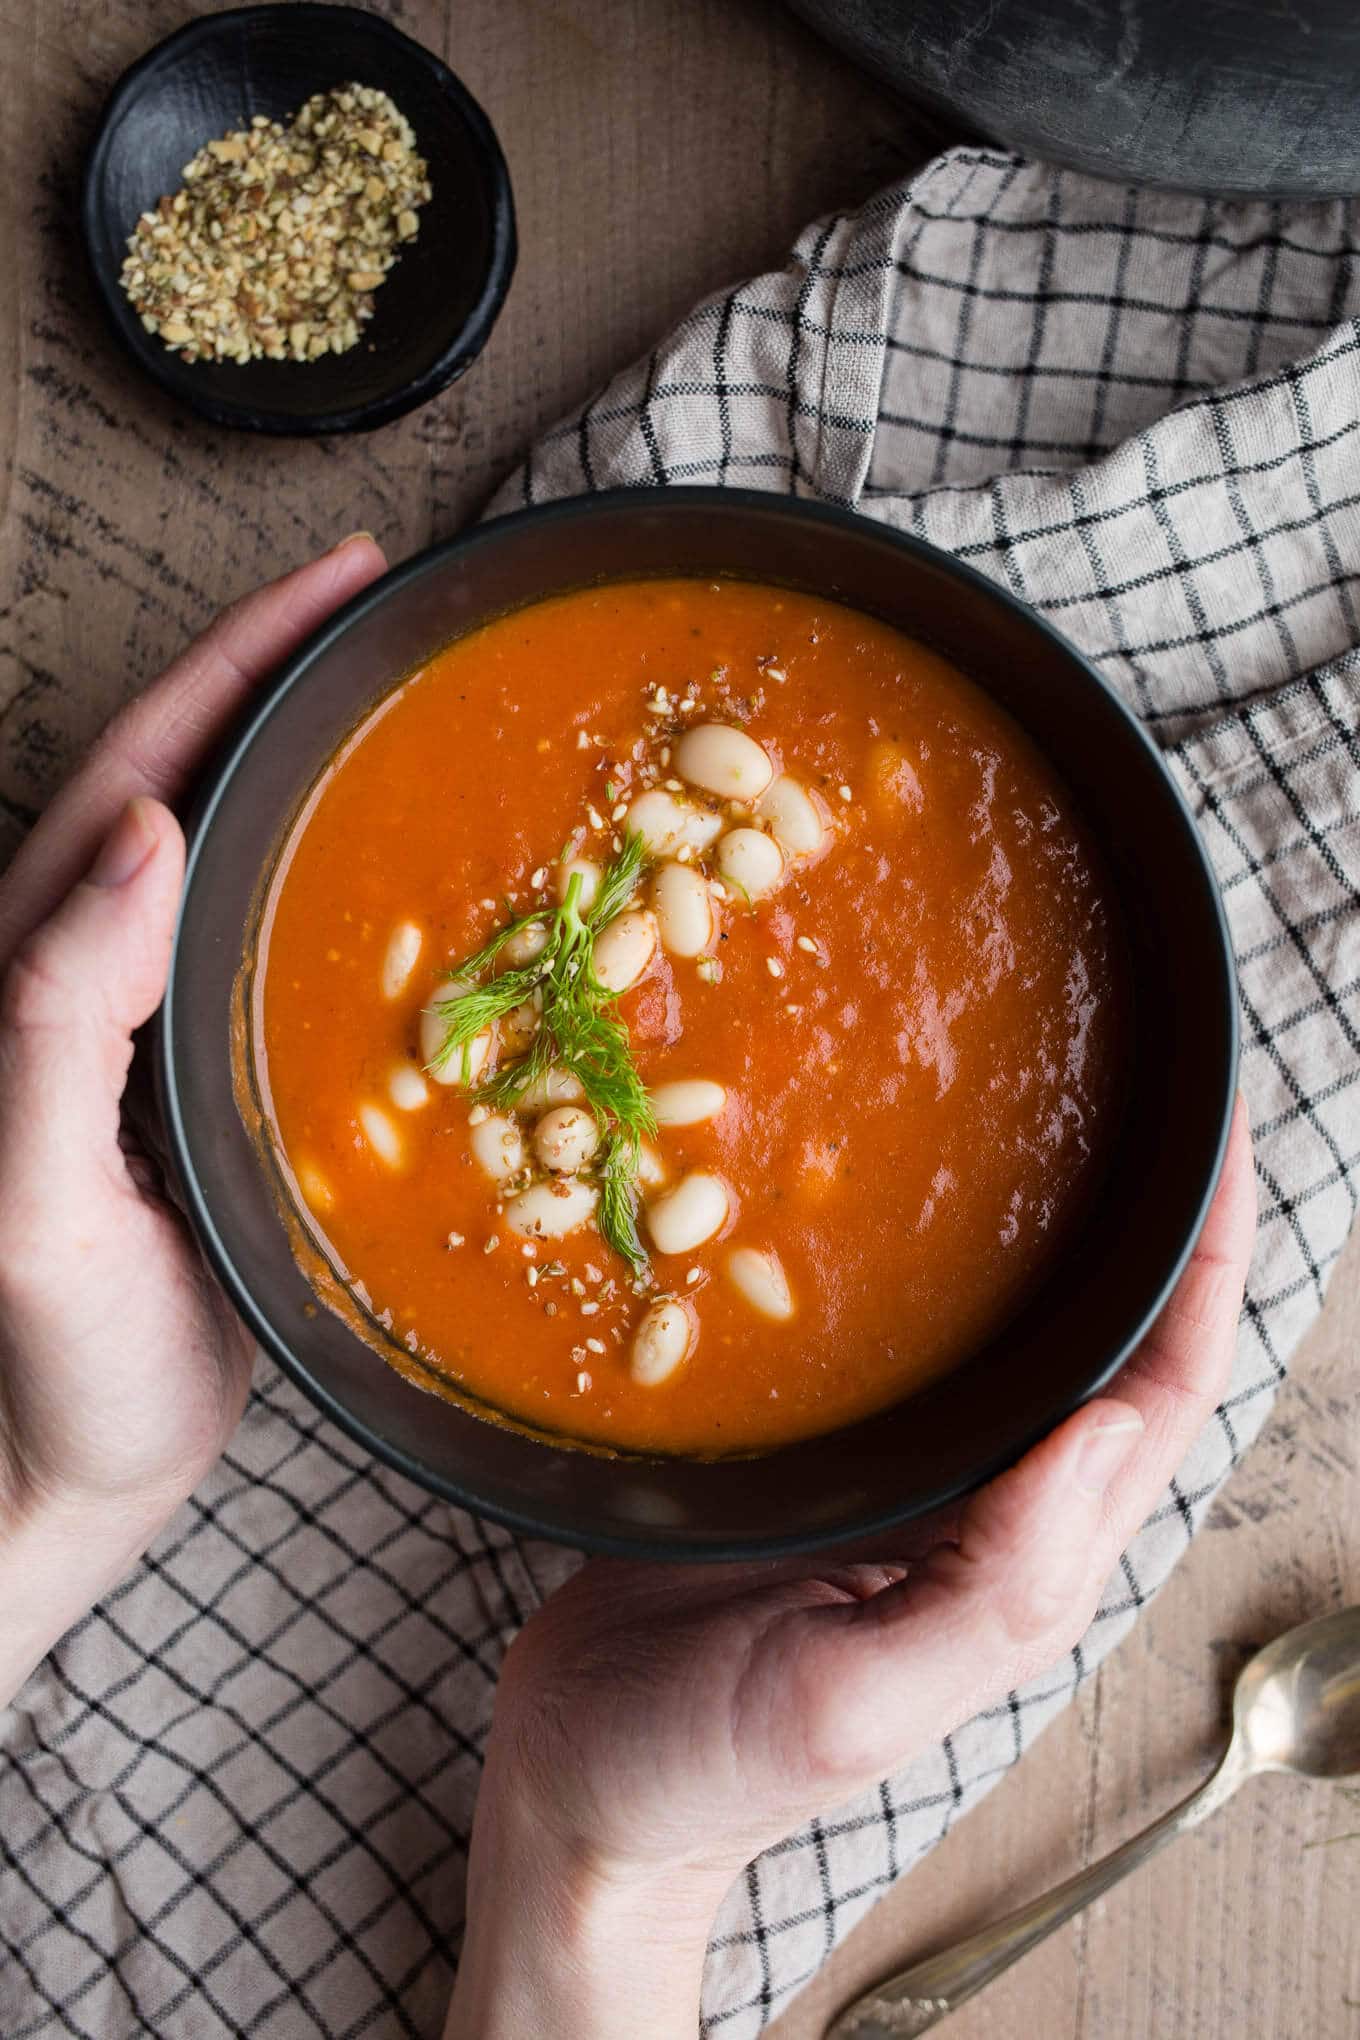 This Roasted Fennel and White Bean Tomato Soup recipe makes for an easy pantry meal. Pair it with salad, sandwiches, or enjoy on its own! Gluten-free, vegan.